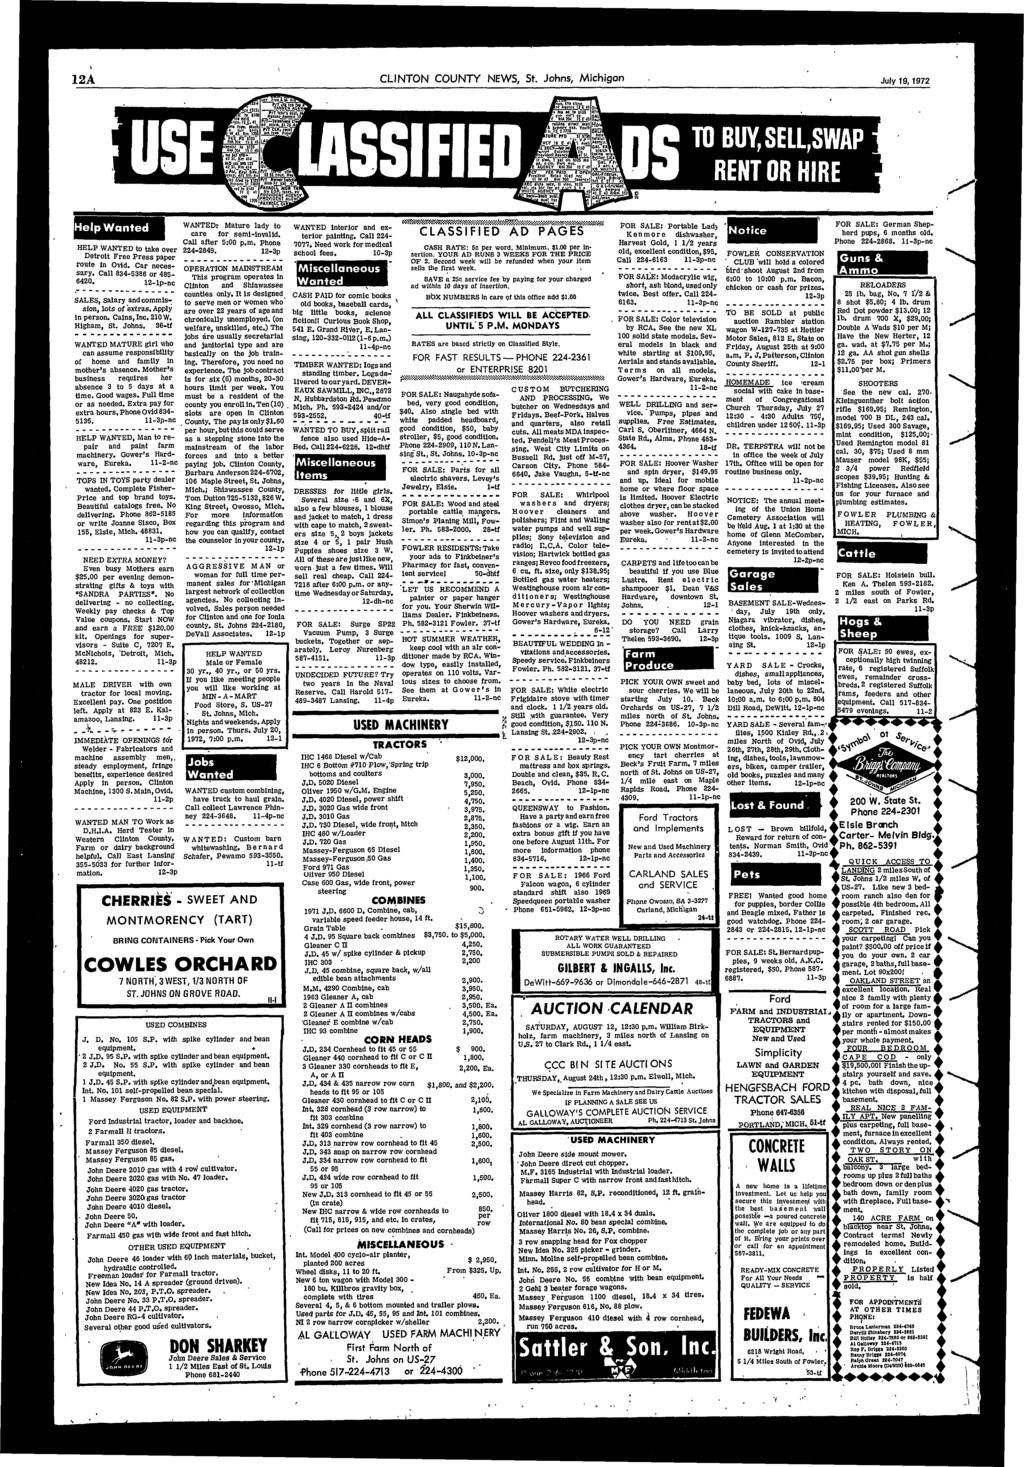 12A CLINTON COUNTY NEWS, St. Johns, Mchgan July 19,1972 Help Wanted HELP WANTED to take oyer Detrot Free Press paper route n Ovd. Car necessary. Call 834-5386 or 485-6420.